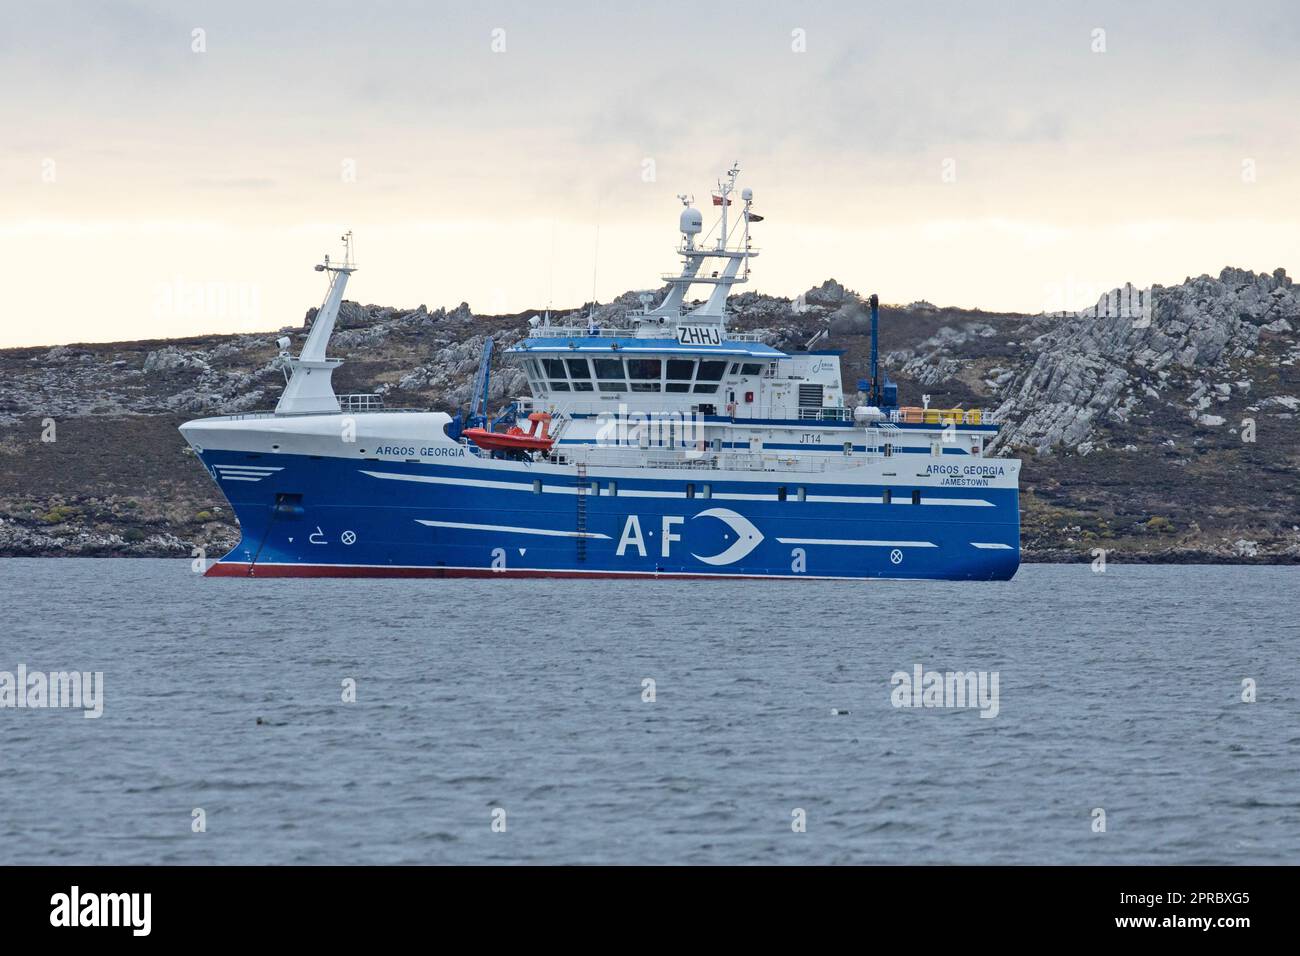 The Argos Georgia , a fishing boat based in St. Helena. Seen here in Stanley Sound in The Falkland Islands. Stock Photo